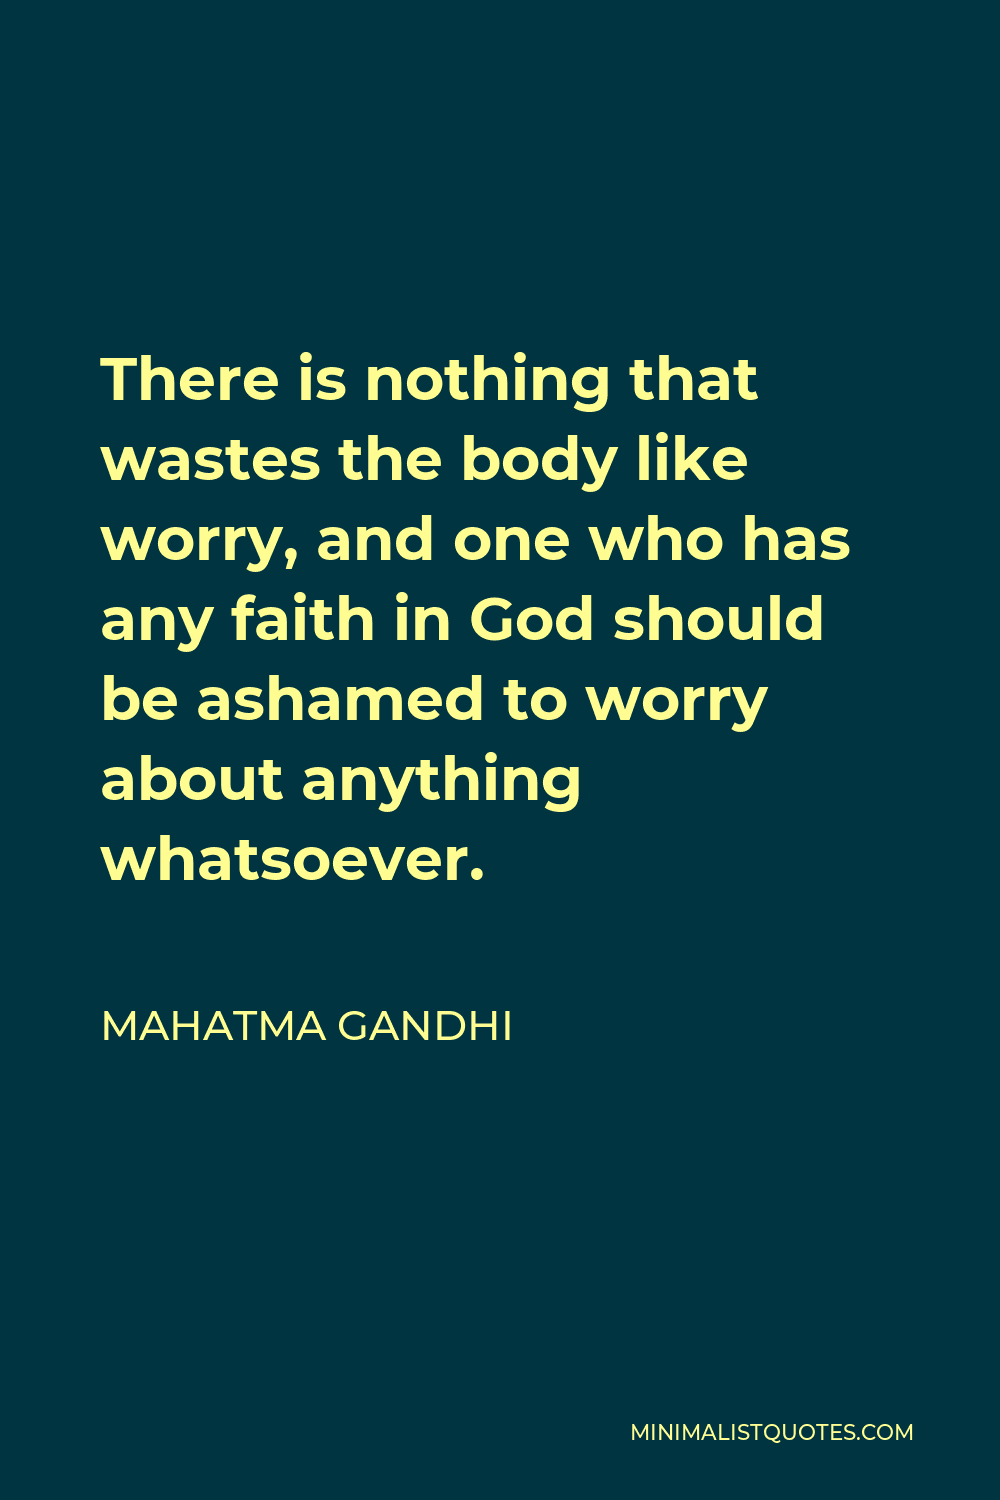 Mahatma Gandhi Quote - There is nothing that wastes the body like worry, and one who has any faith in God should be ashamed to worry about anything whatsoever.